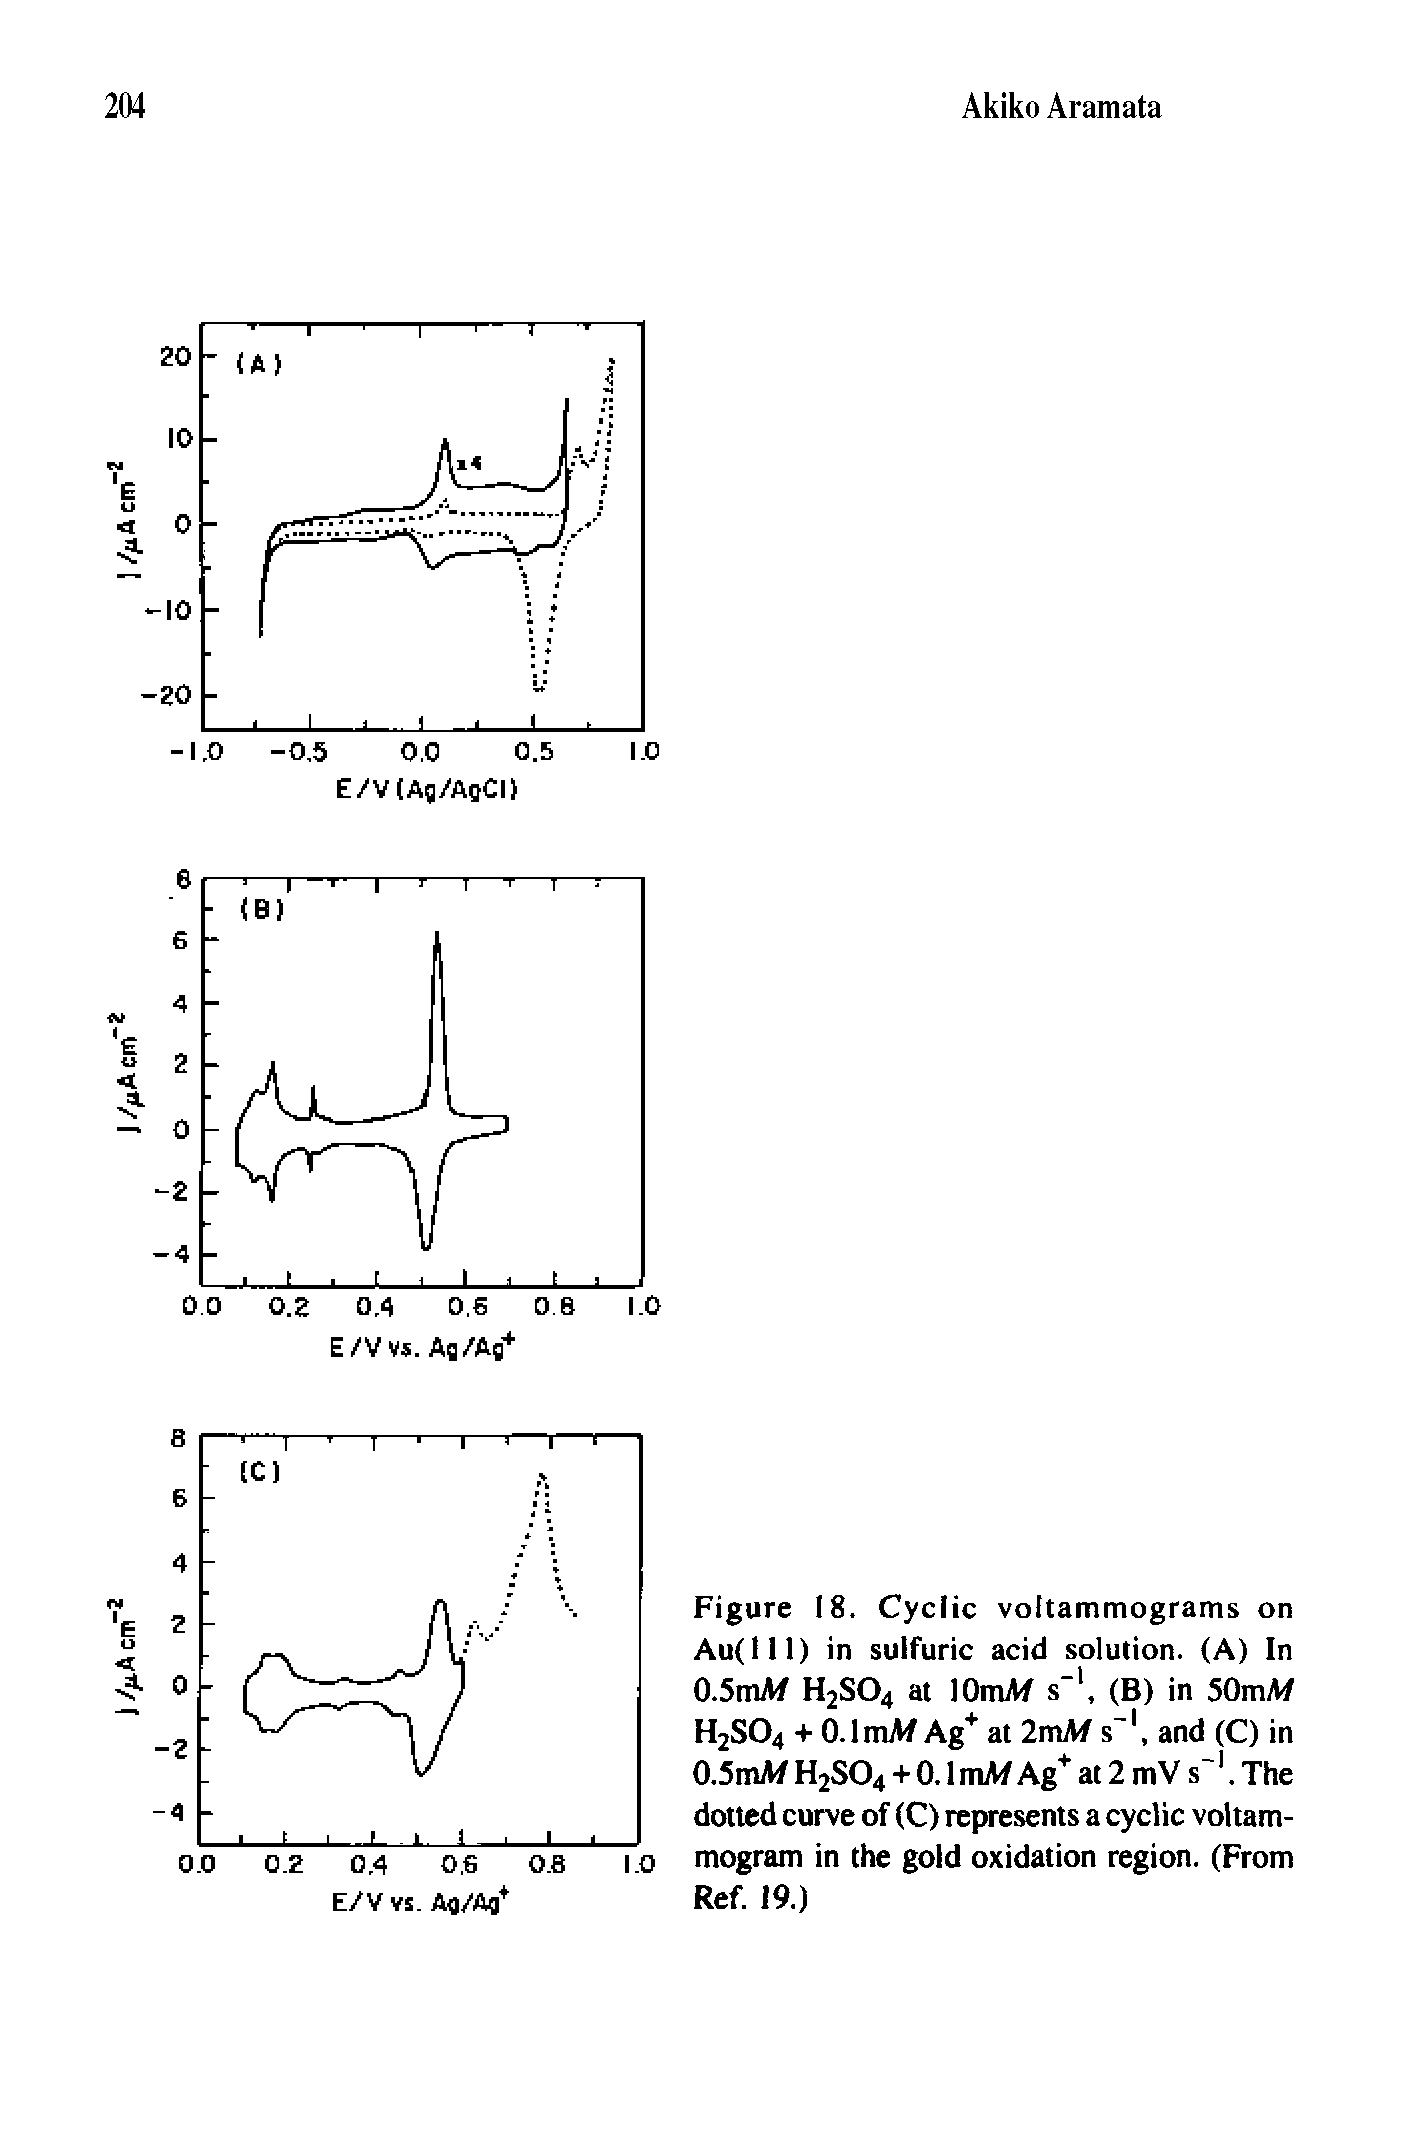 Figure 18. Cyclic voltammograms on Au(III) in sulfuric acid solution. (A) In O.SmAf H2SO4 at lOmAf s", (B) in 50mM H2SO4 + O.lmAf Ag at 2mA/ s, and (C) in 0.5mA/ H2SO4 + 0.1 itiA/ Ag at 2 mV s. The dotted curve of (C) represents a cyclic voltam-mogram in the gold oxidation region. (From Ref. 19.)...